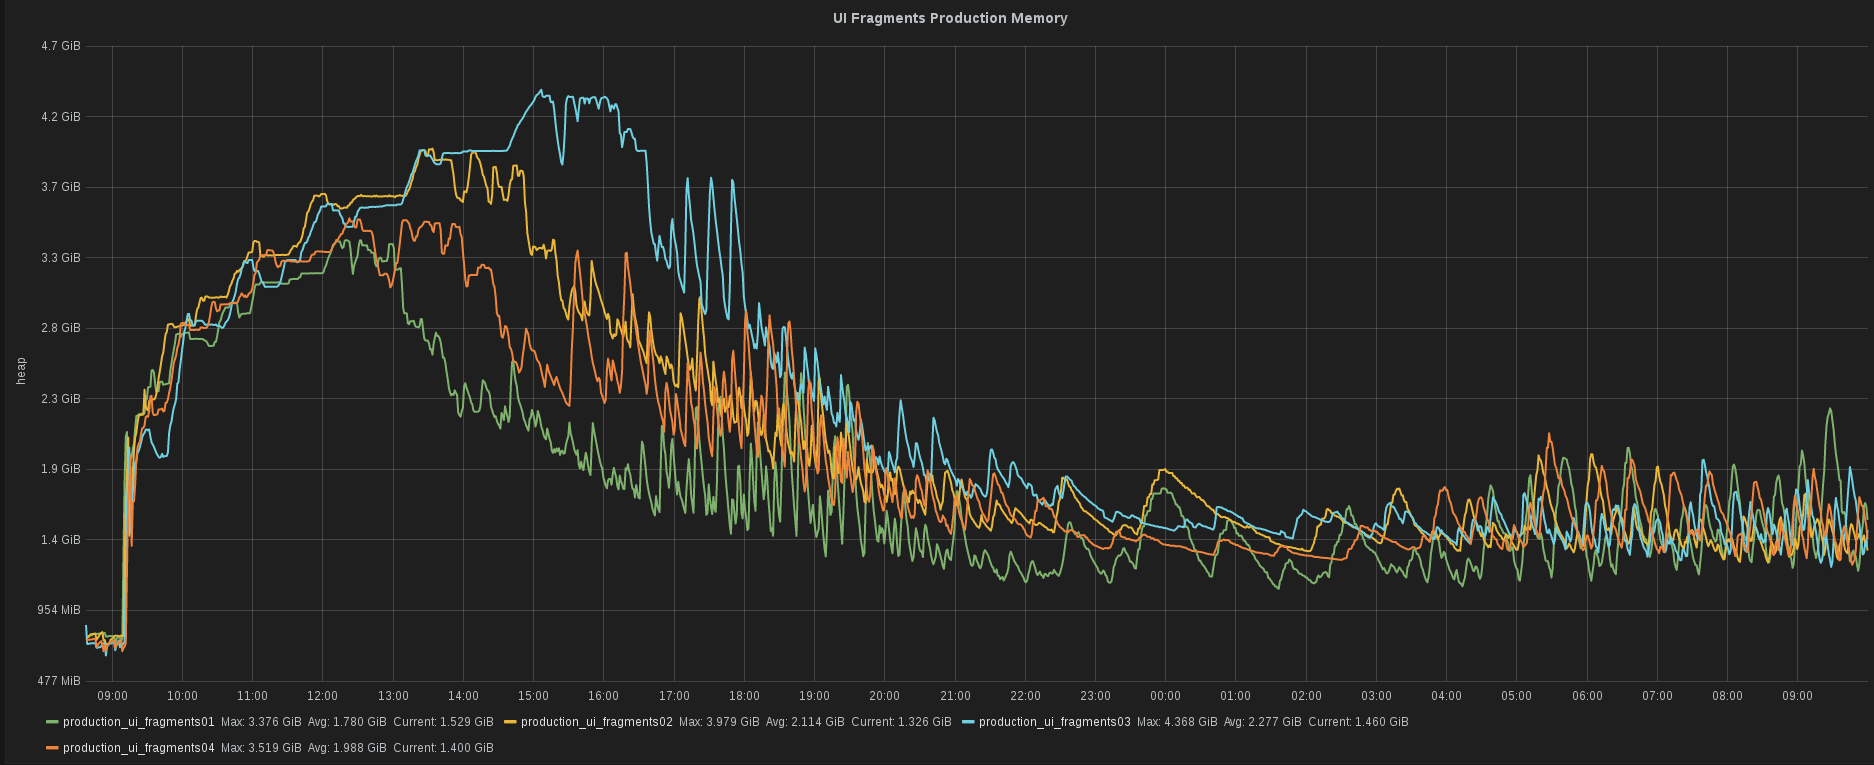 Heap size consumed by JRuby worker during troubleshooting memory issues on JVM.